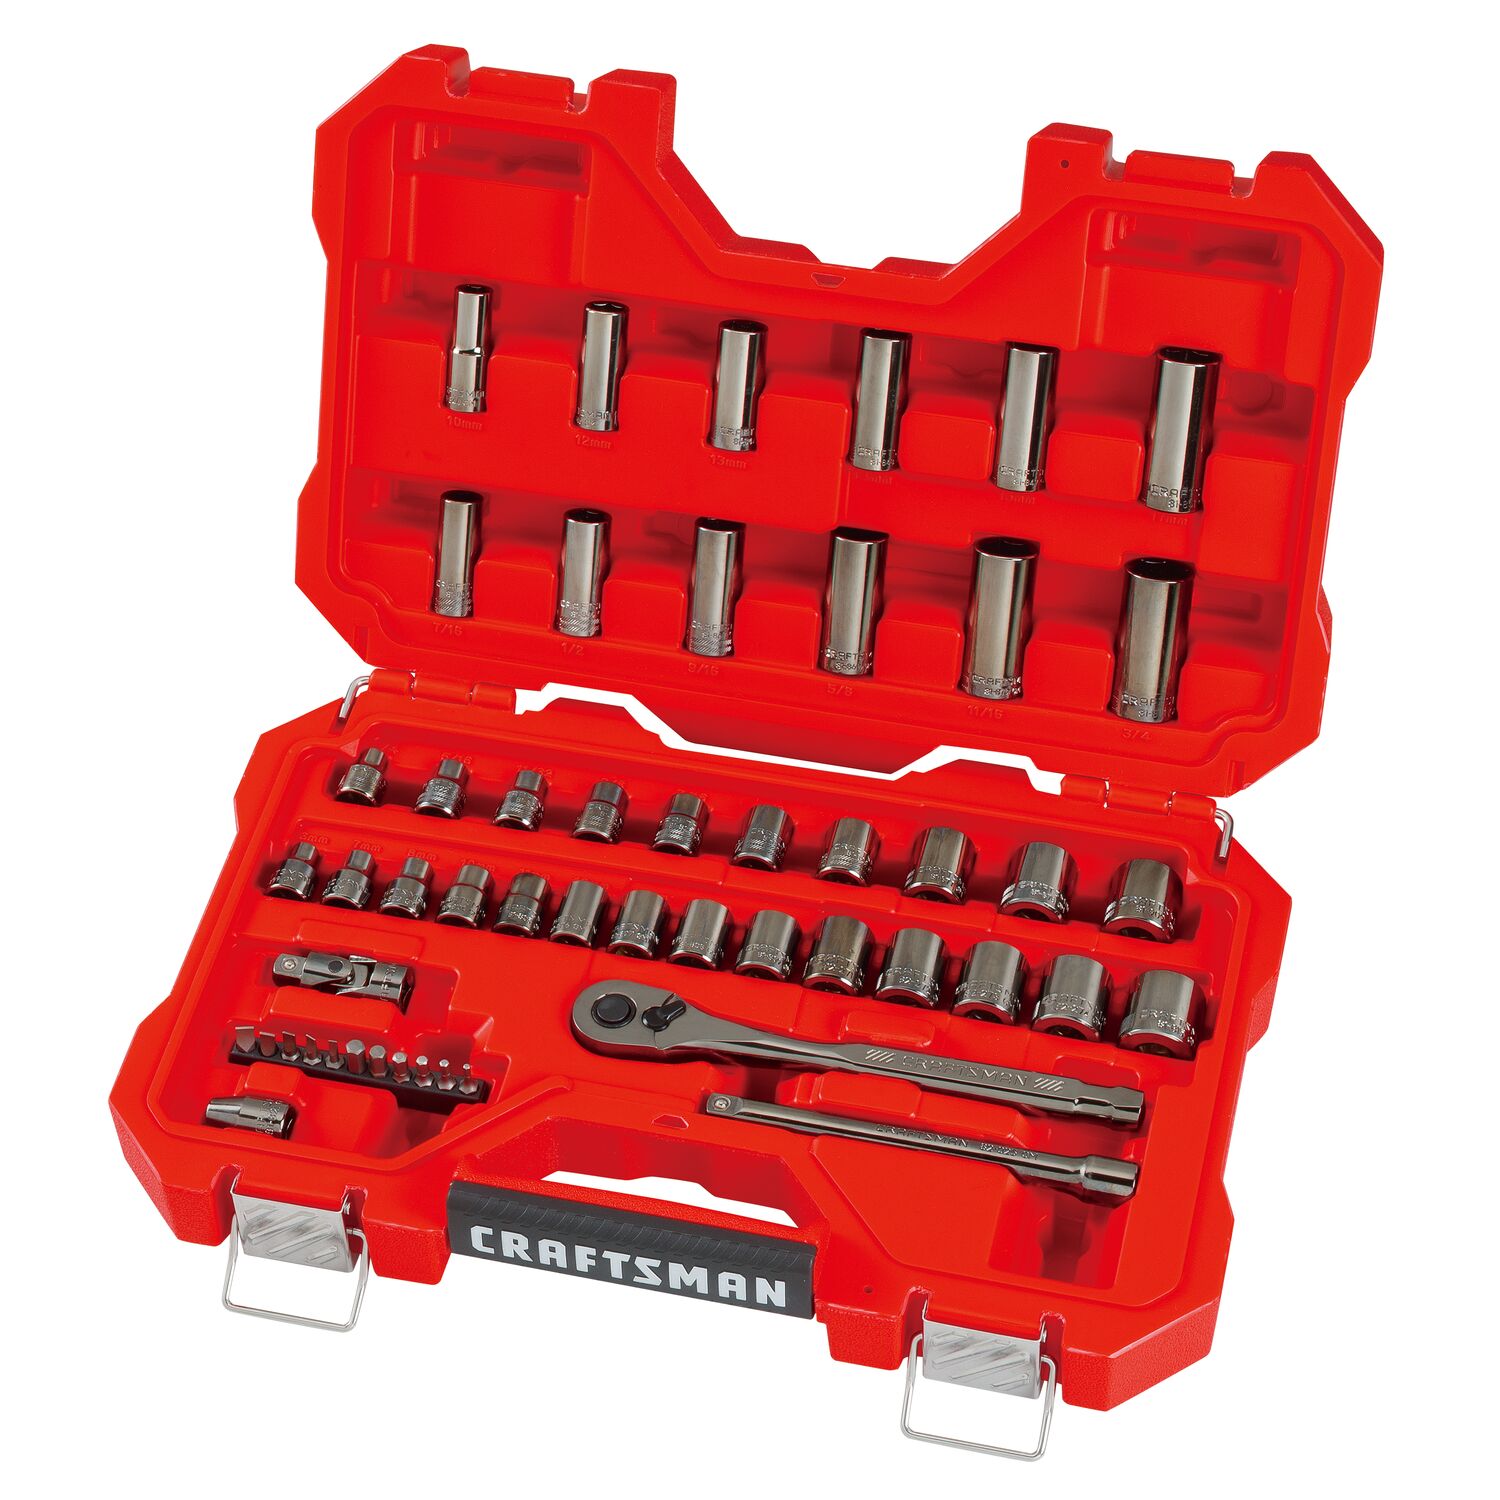  Home Marine Automotive Electrical Tool Kit Set with